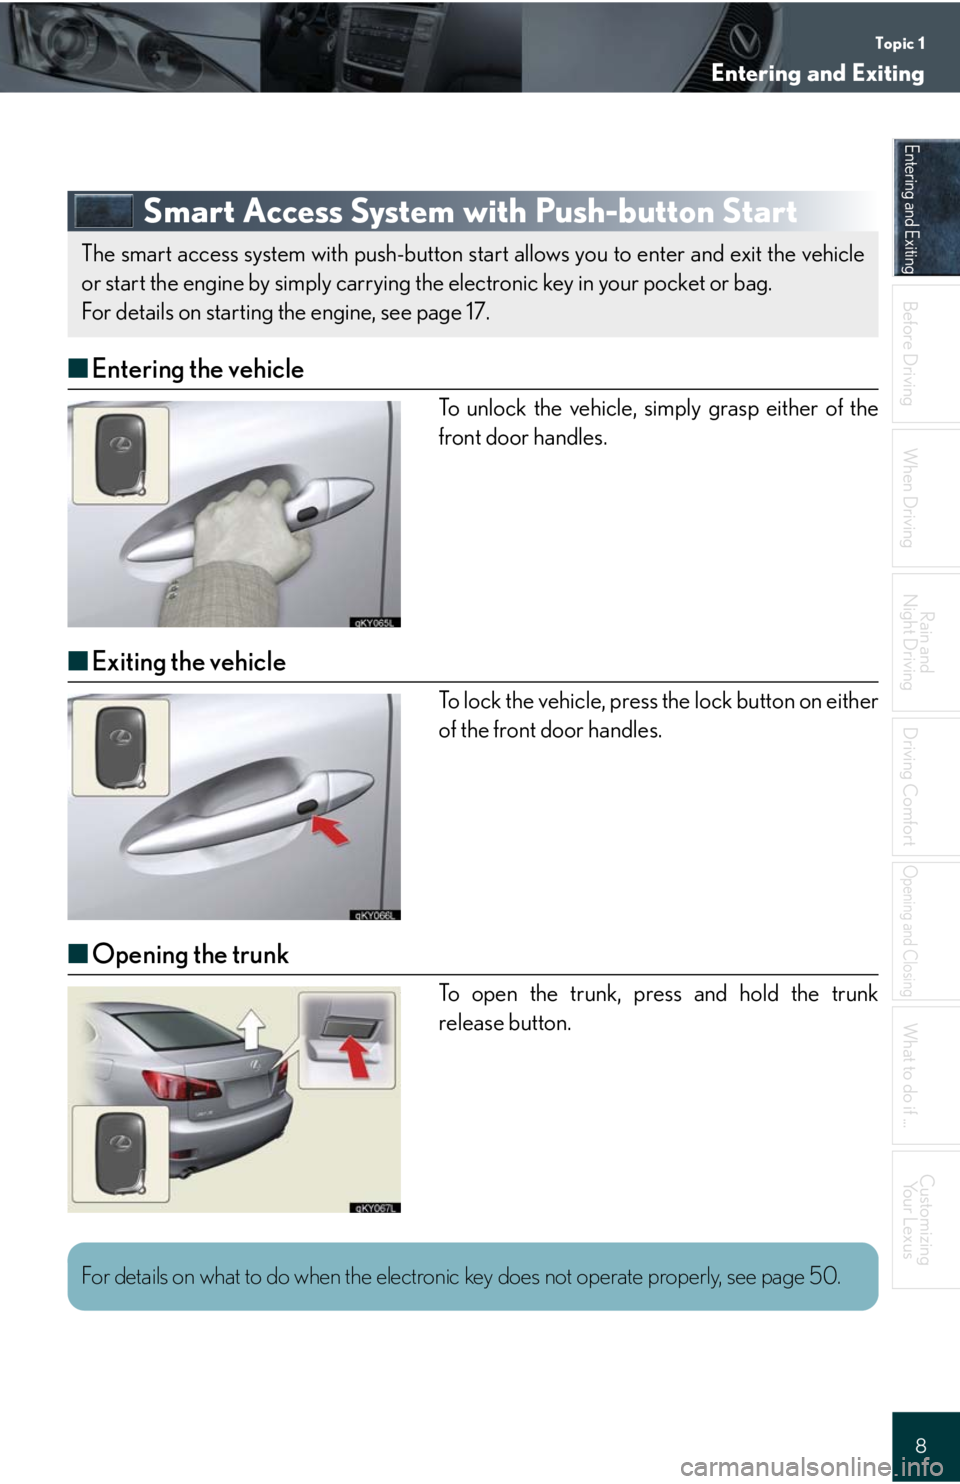 Lexus IS250 2008  Using the air conditioning system and defogger / LEXUS 2008 IS 350/250 QUICK GUIDE OWNERS MANUAL (OM60D81U) Topic 1
Entering and Exiting
8
Entering and Exiting
When Driving
Rain and 
Night Driving
Driving Comfort
Opening and Closing
What to do if ...
Customizing
Yo u r  L e x u s
Before DrivingBefore Drivin